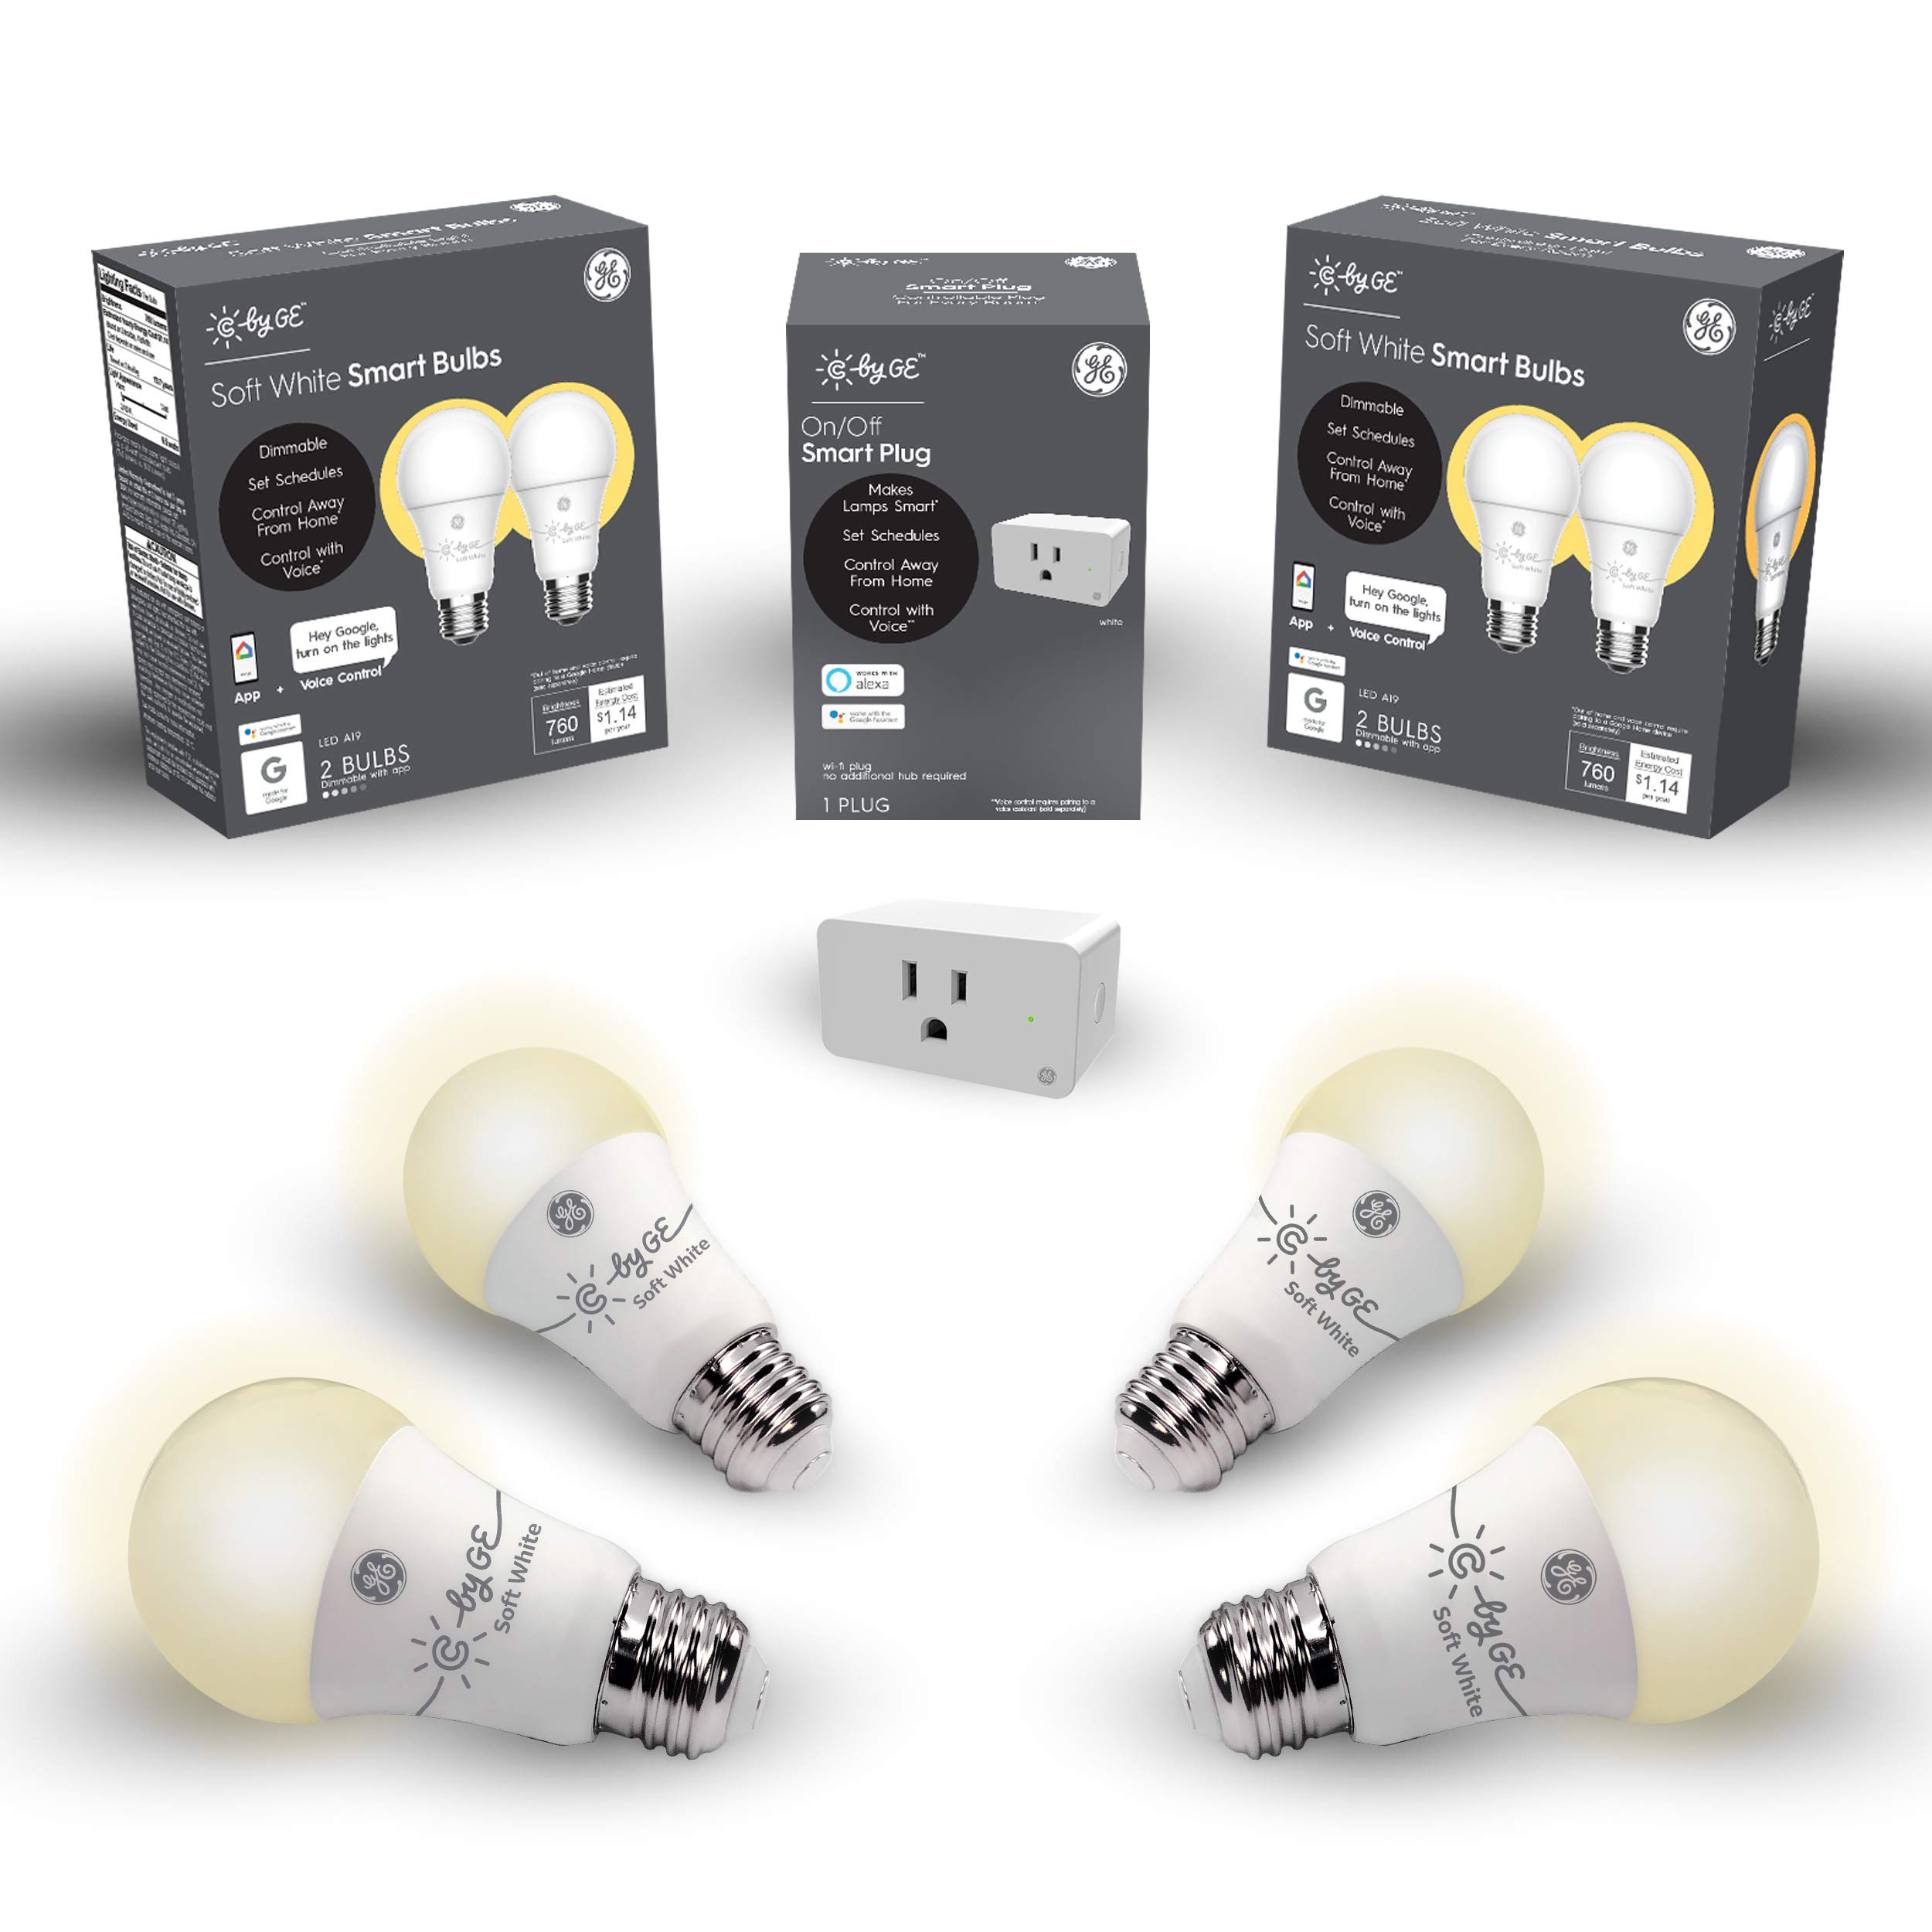 C by GE Smart Bundle Pack with 4 Smart Bulb and Smart Plug (4 LED A19 Soft White Bulbs + On/Off Smart Plug), Works with Alexa and Google Assistant,...